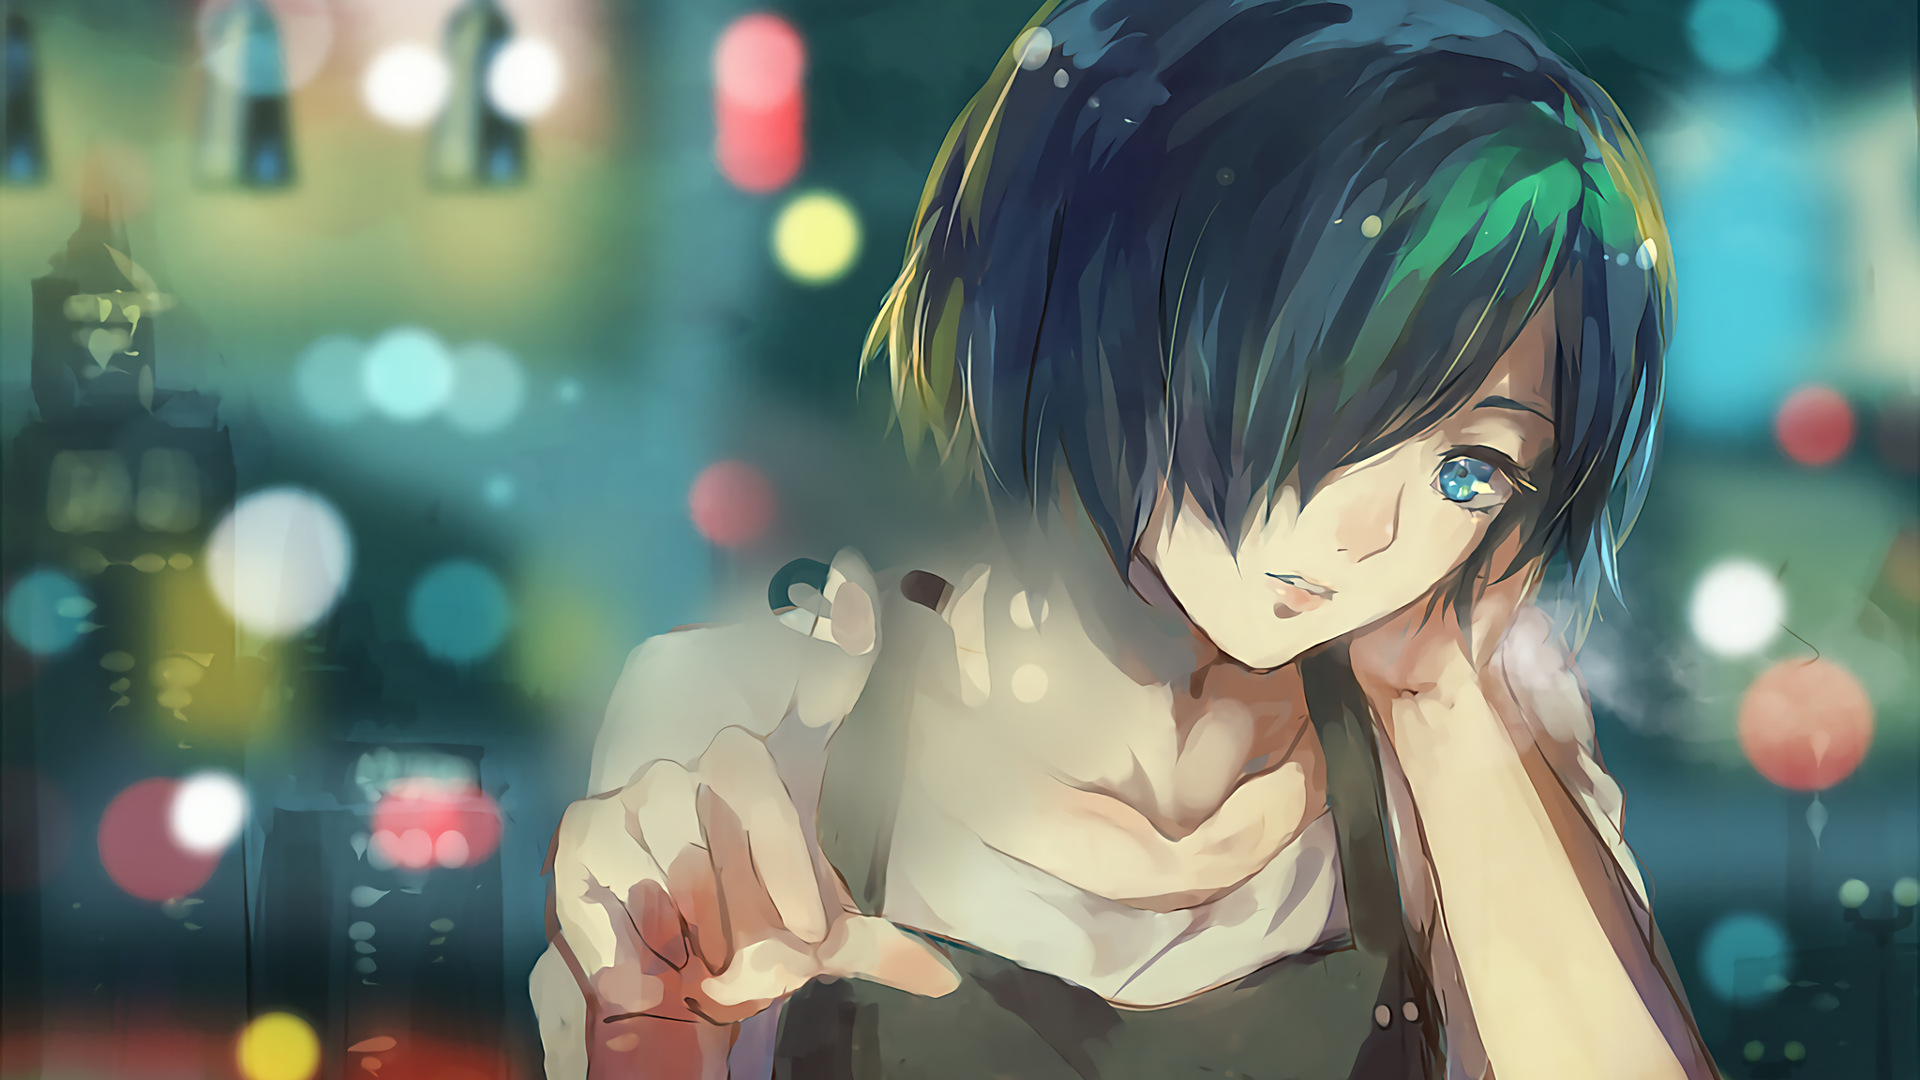 Touka (Tokyo Ghoul) by ふうりん